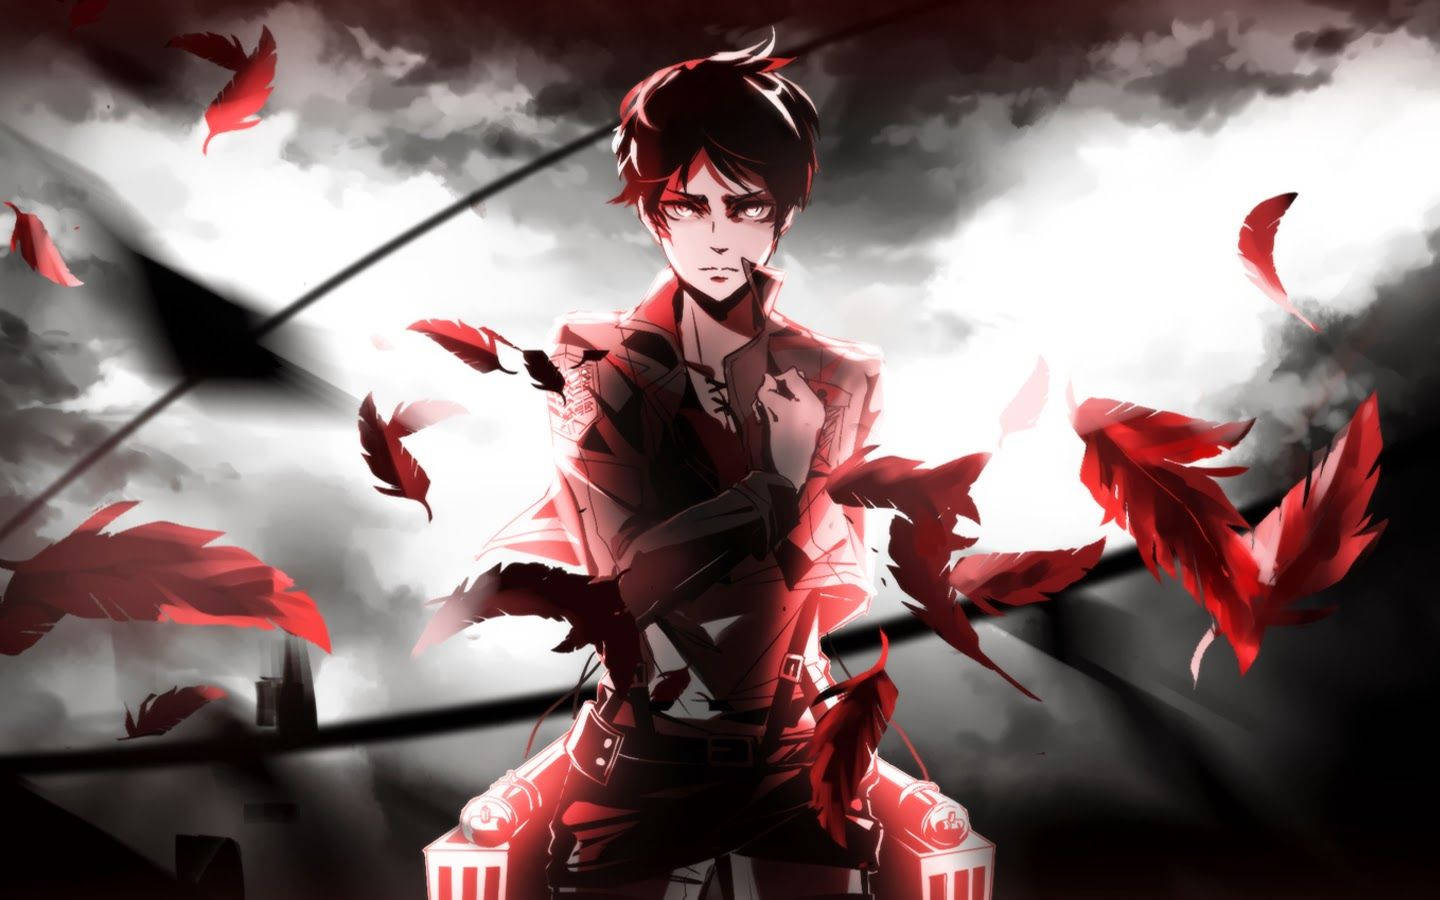 Eren Jaeger, a brave soldier and hero of theTV anime series Attack On Titan, salutes with defiance Wallpaper